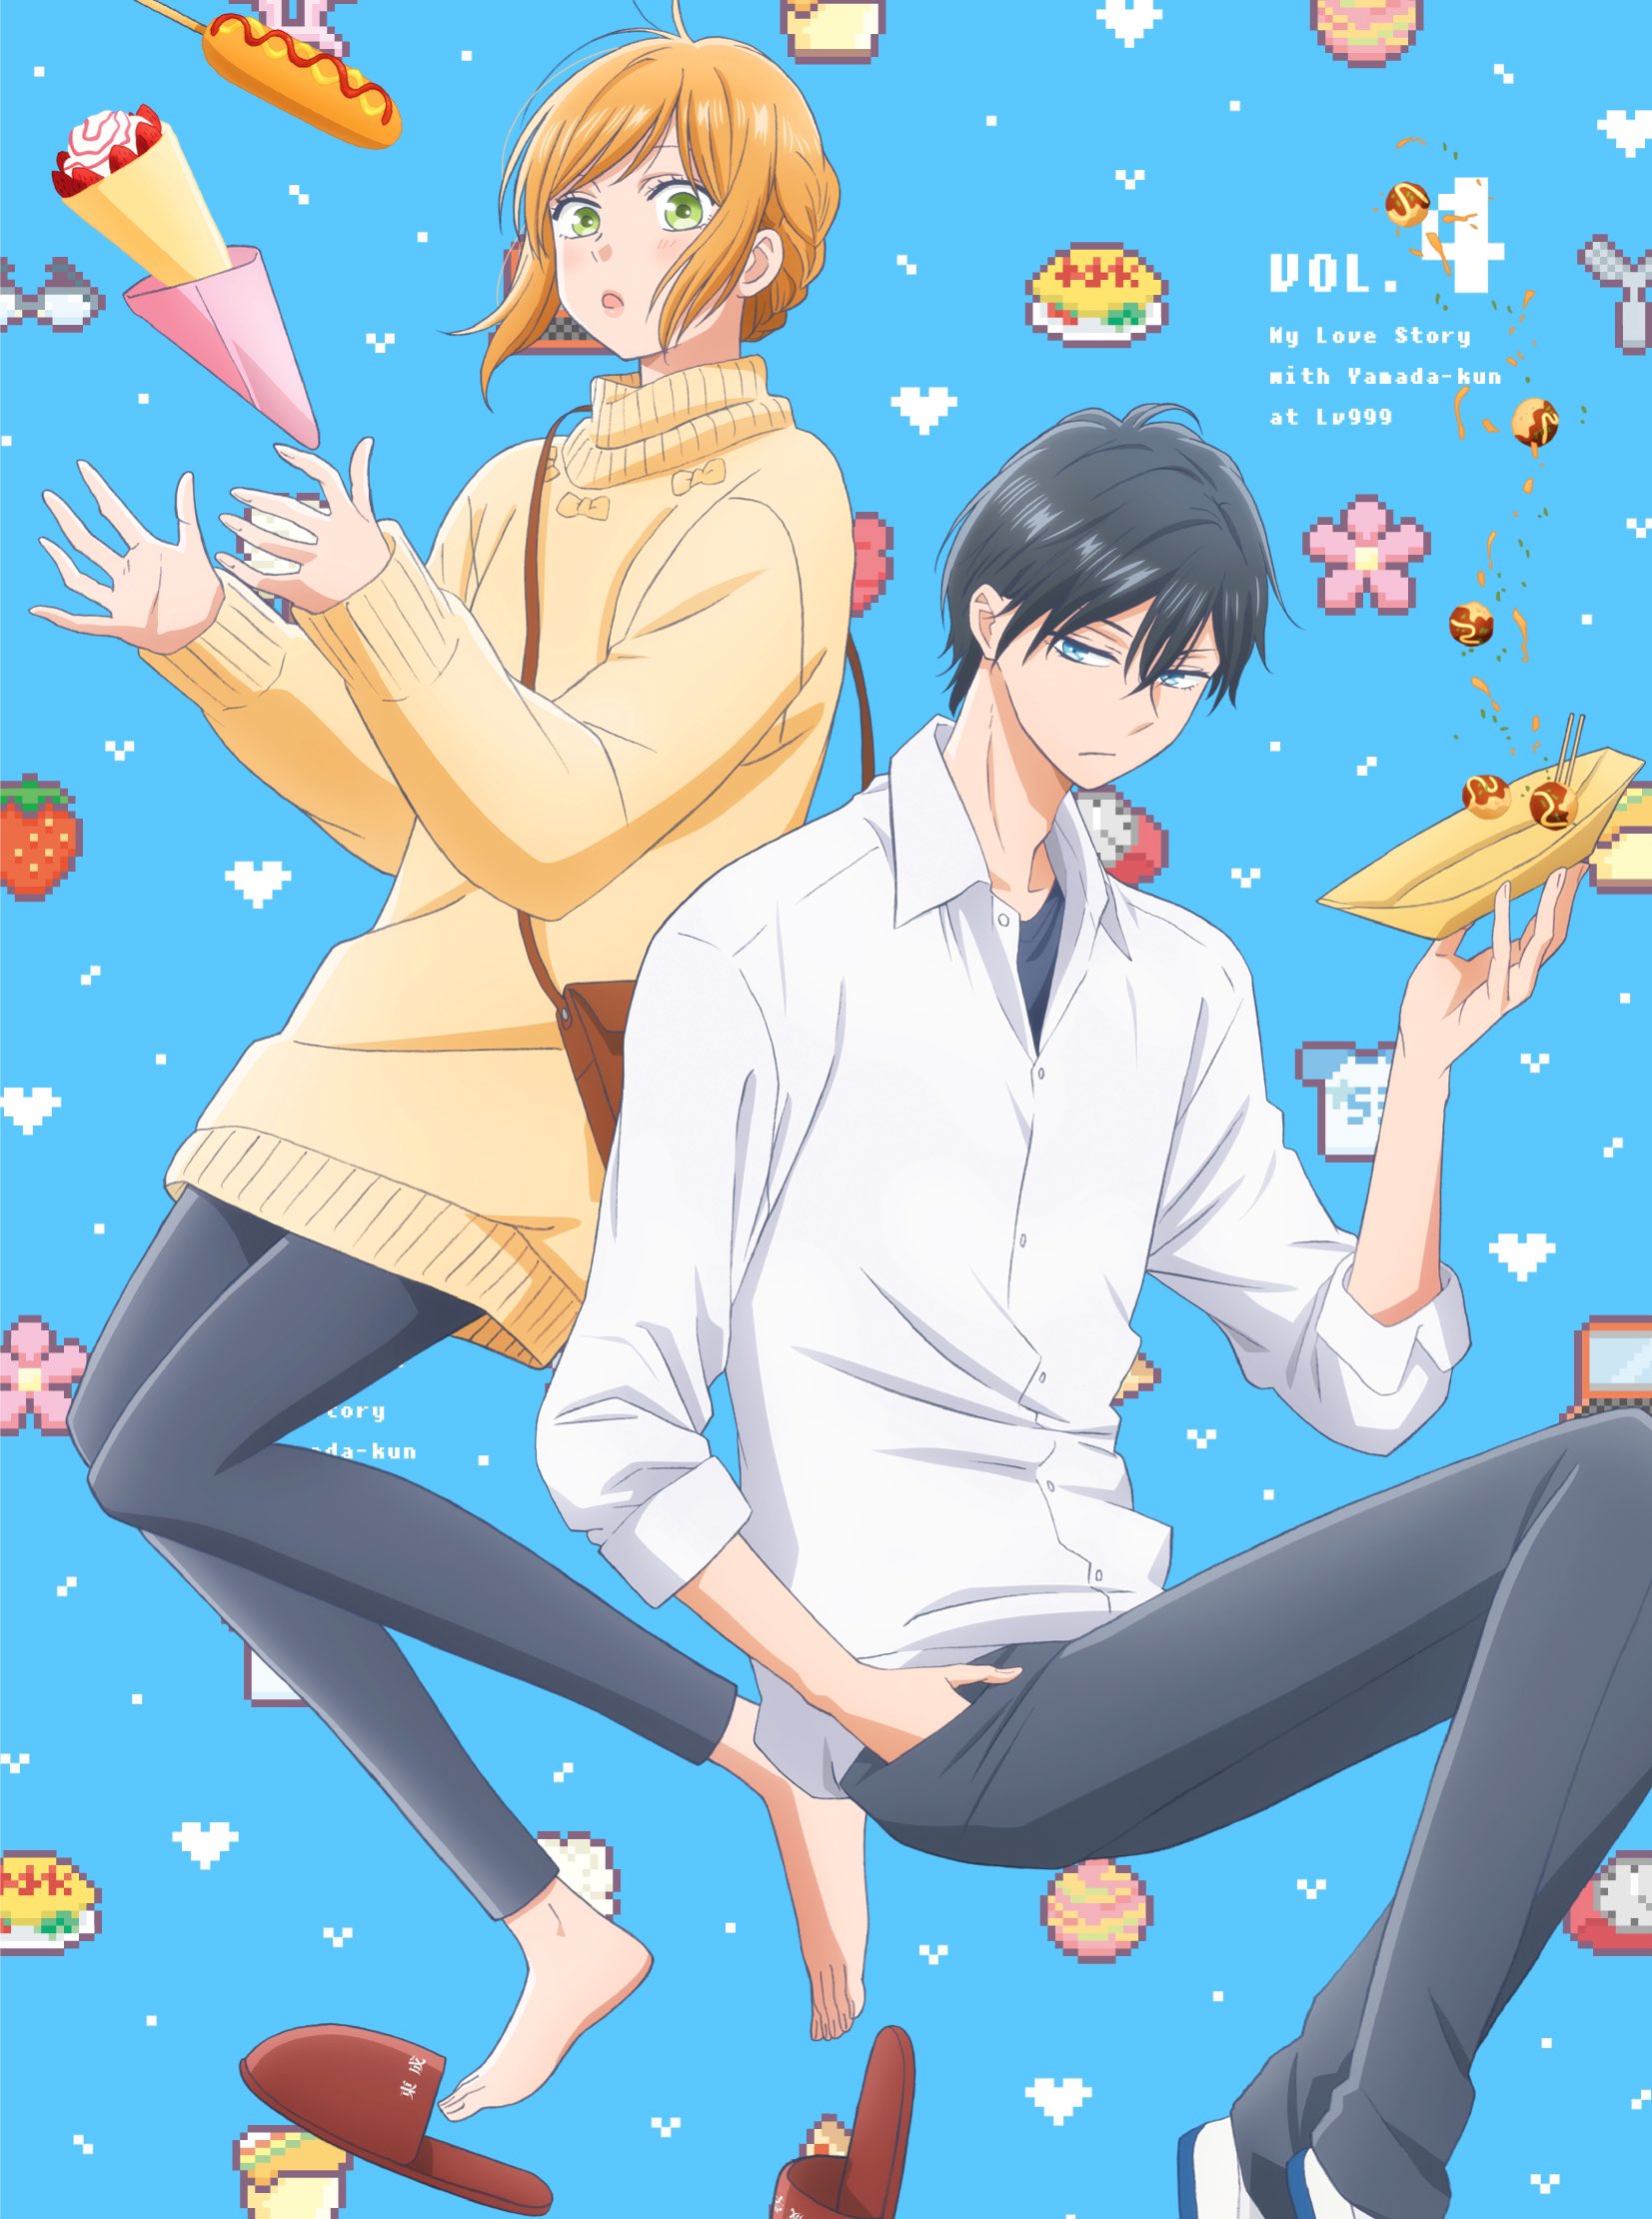 Heart on X: My Love Story with Yamada-kun at Lv999 Blu-ray DVD Volume 4  Cover!  / X